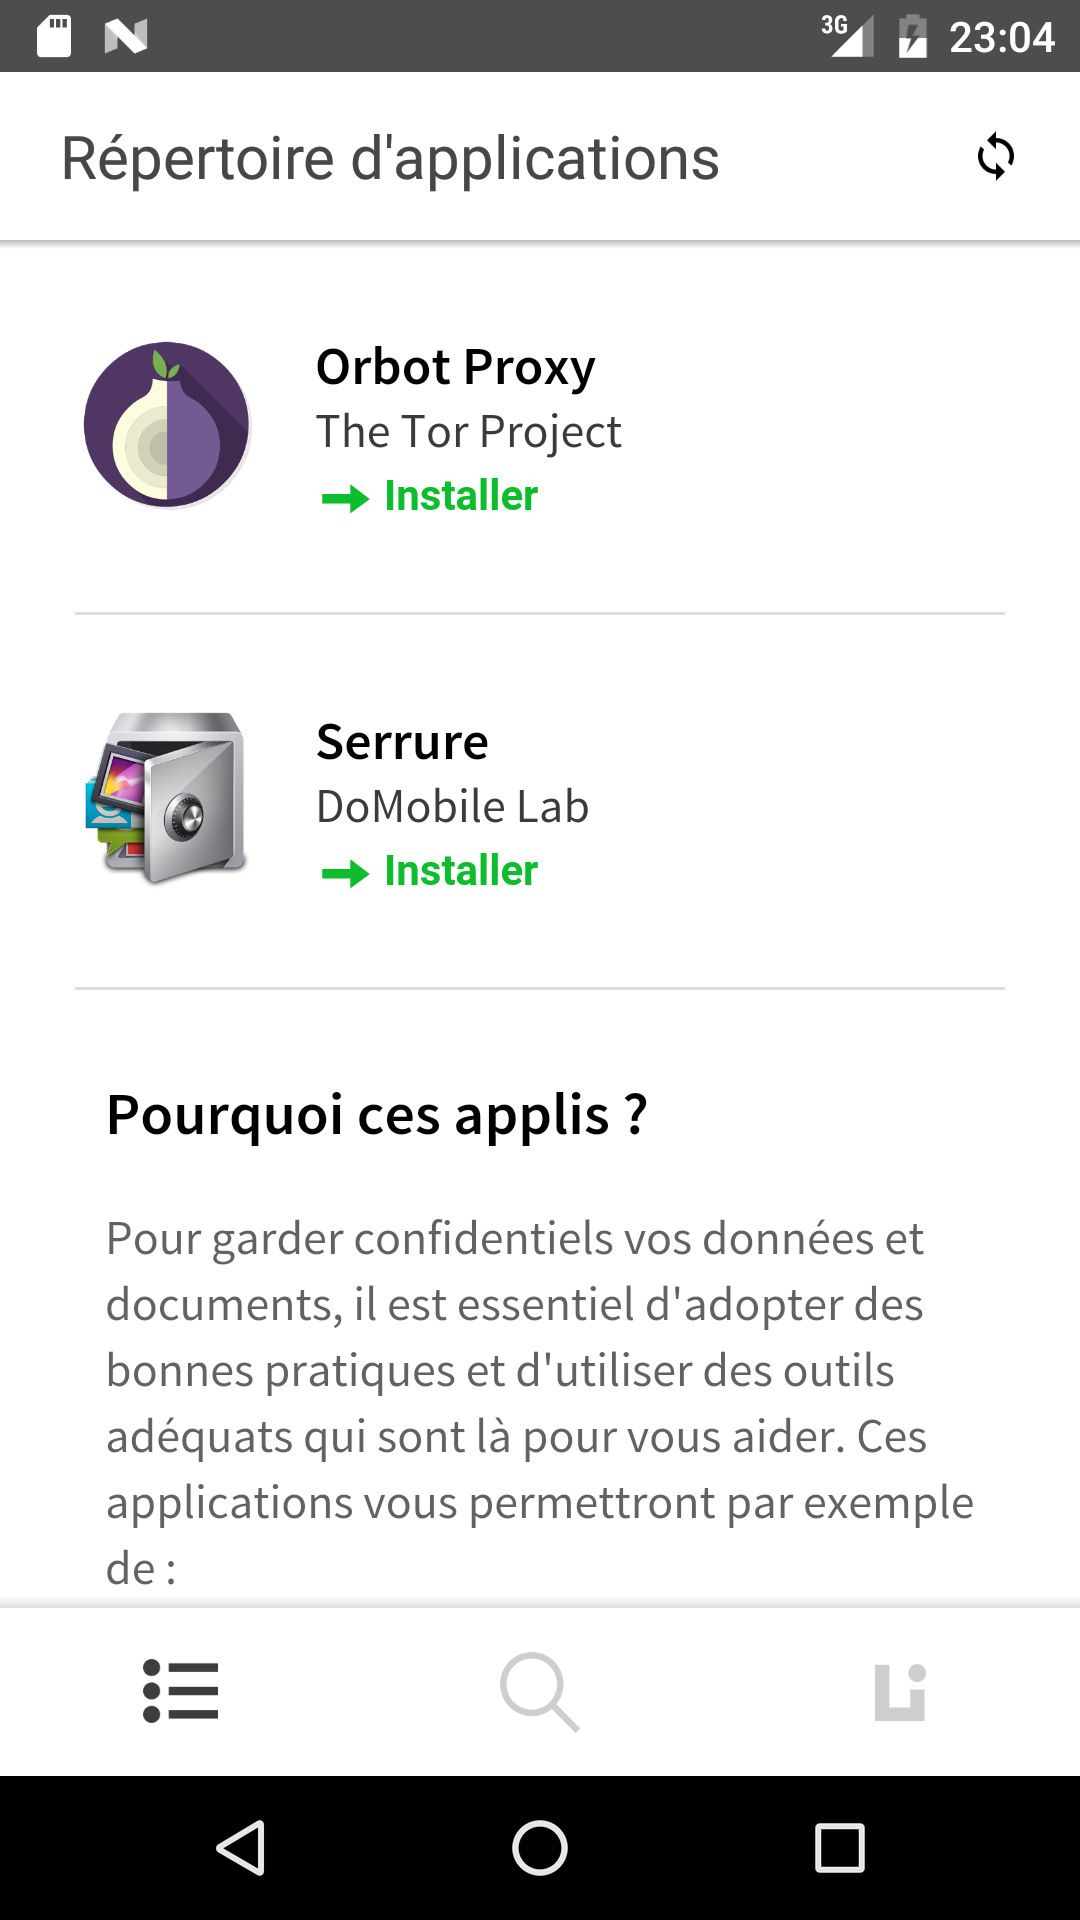 Qwant-mobile-annuaire-applications-2